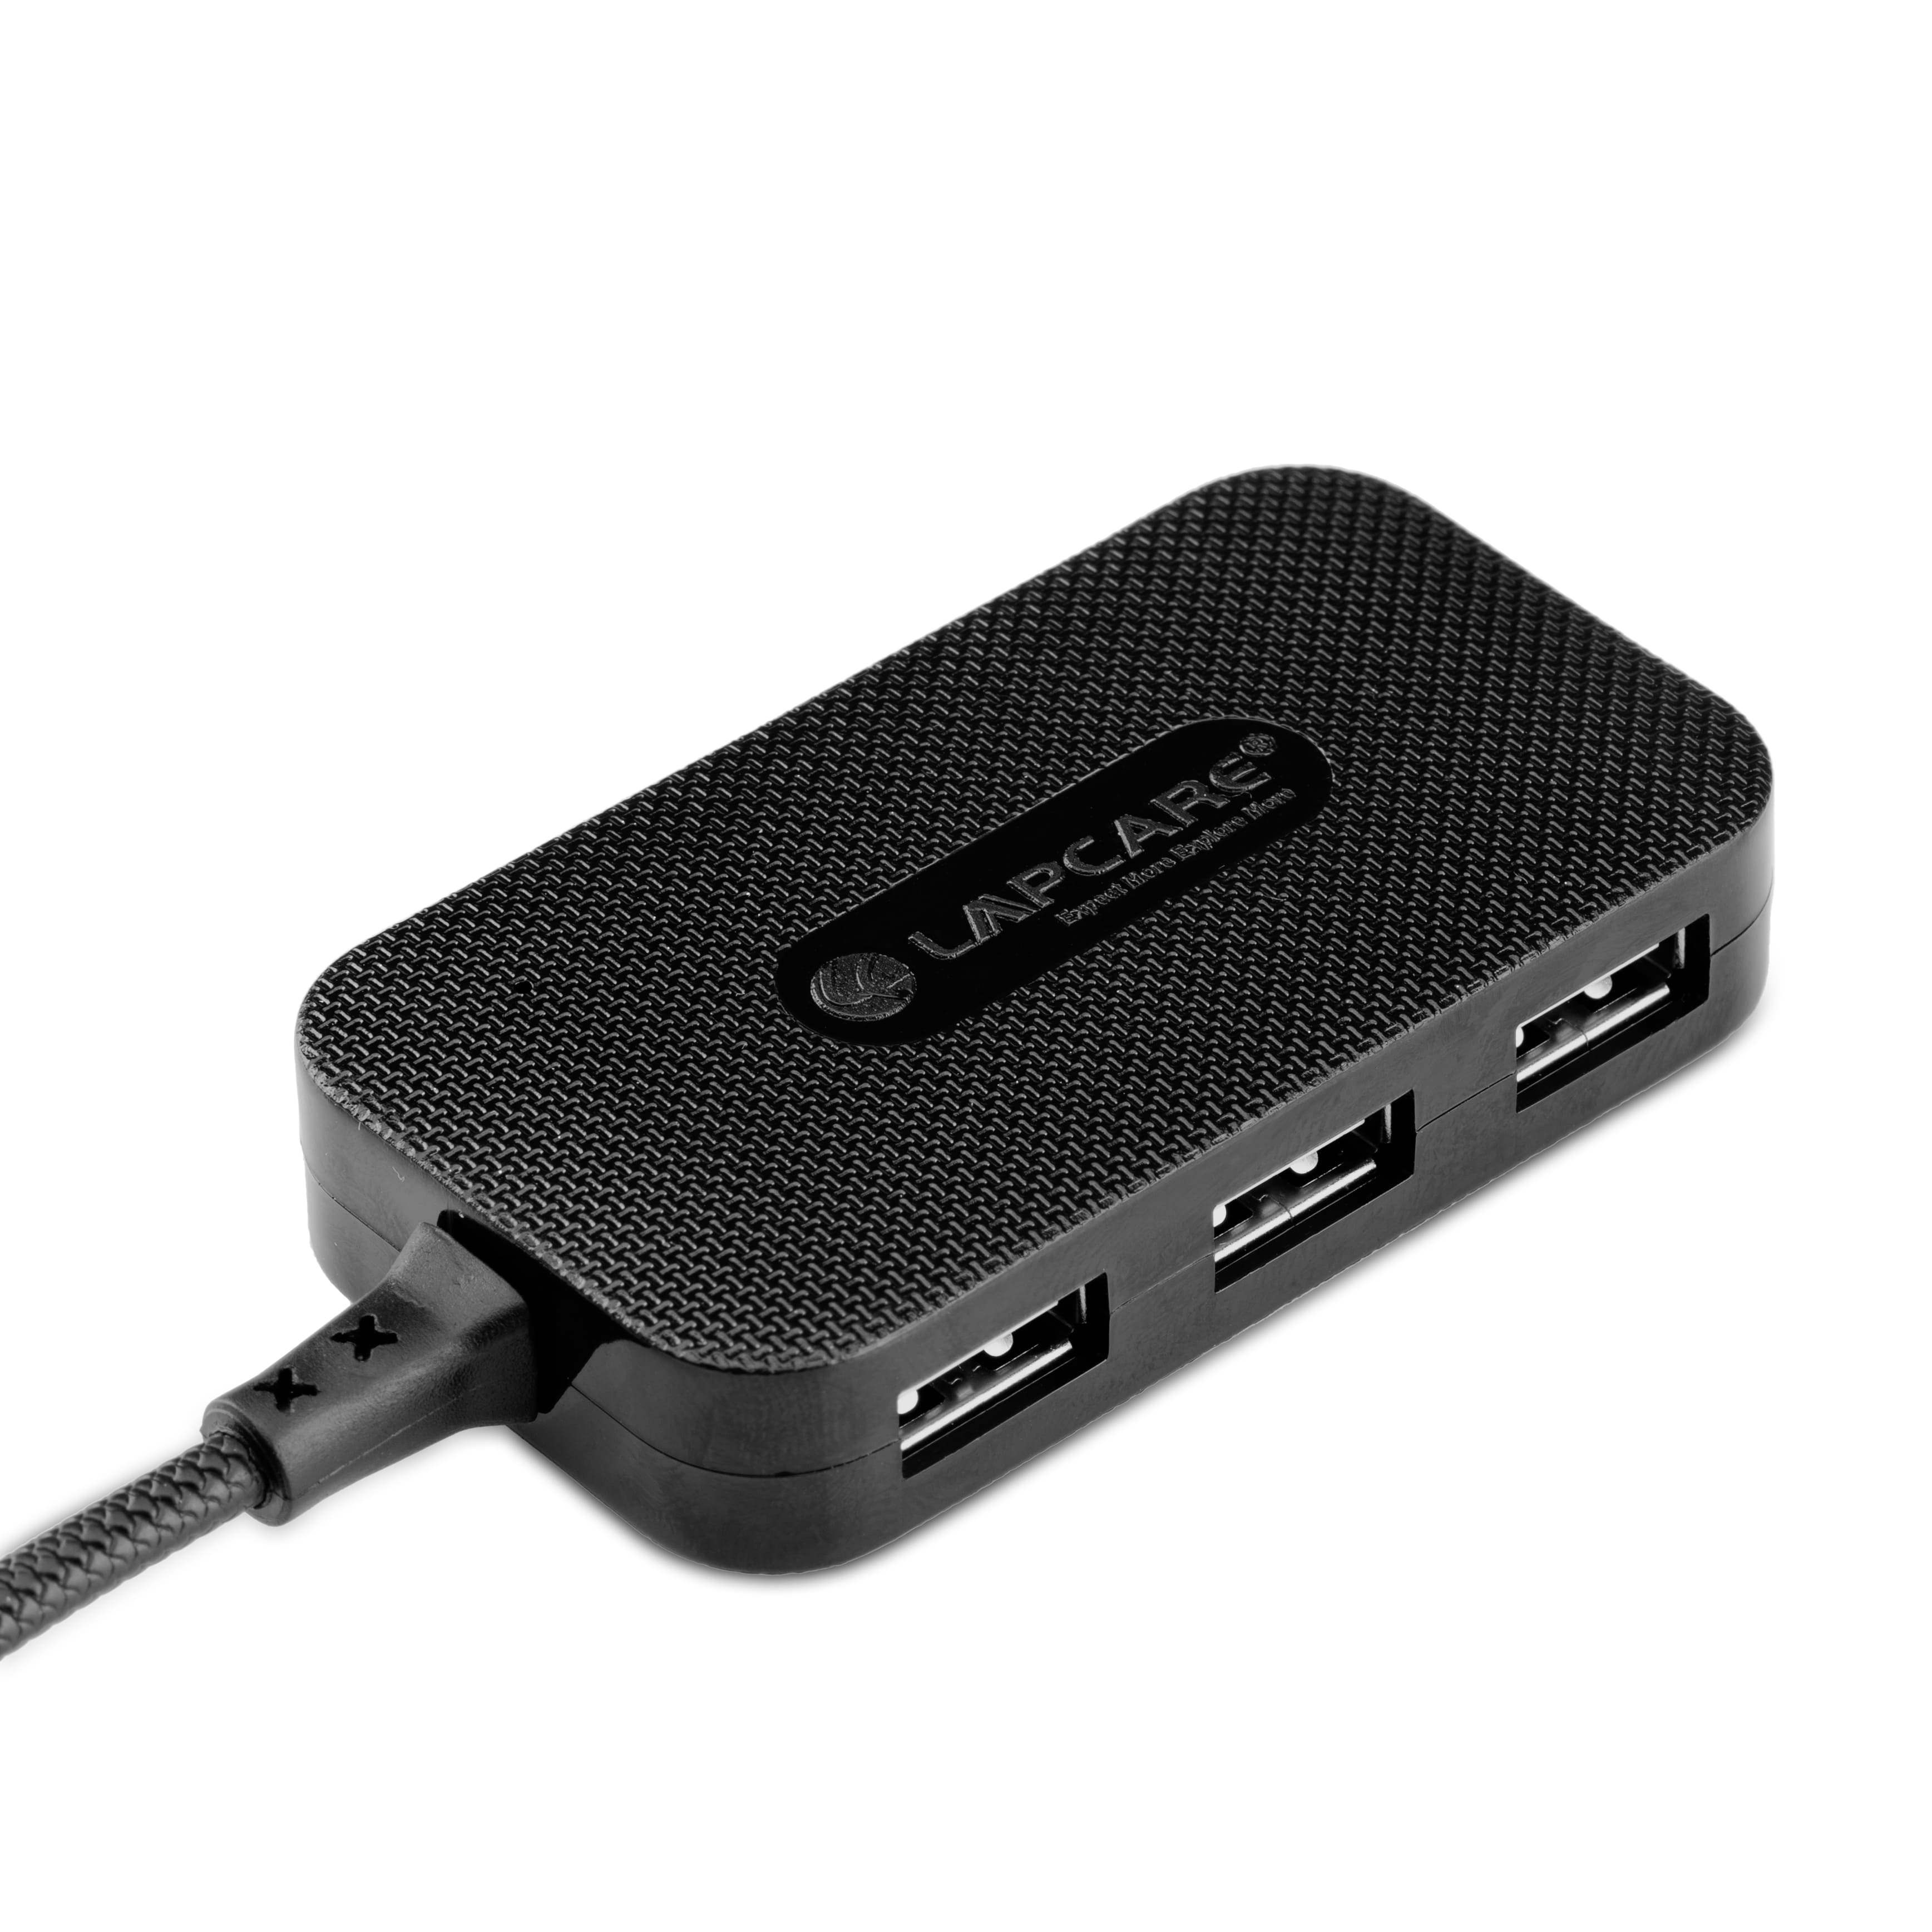 LAP-C Type-C to USB 2.0 4Port Hub with 30cm Cable (IND)(LHB-411)